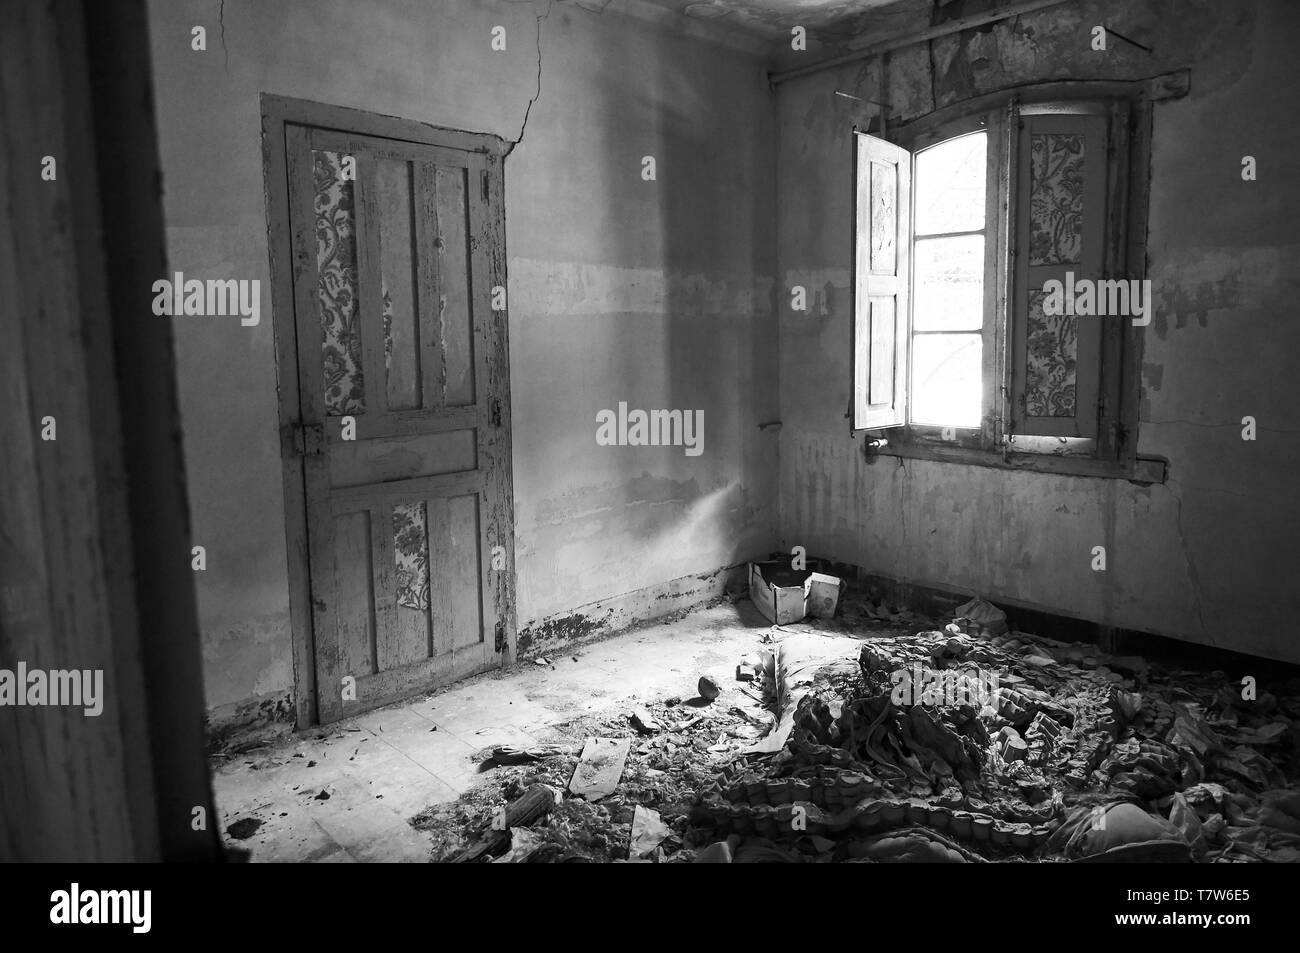 Interior of a room in ruined facilities at the abandoned Canfranc International railway station (Canfranc,Pyrenees,Huesca,Aragon,Spain). B&W version Stock Photo